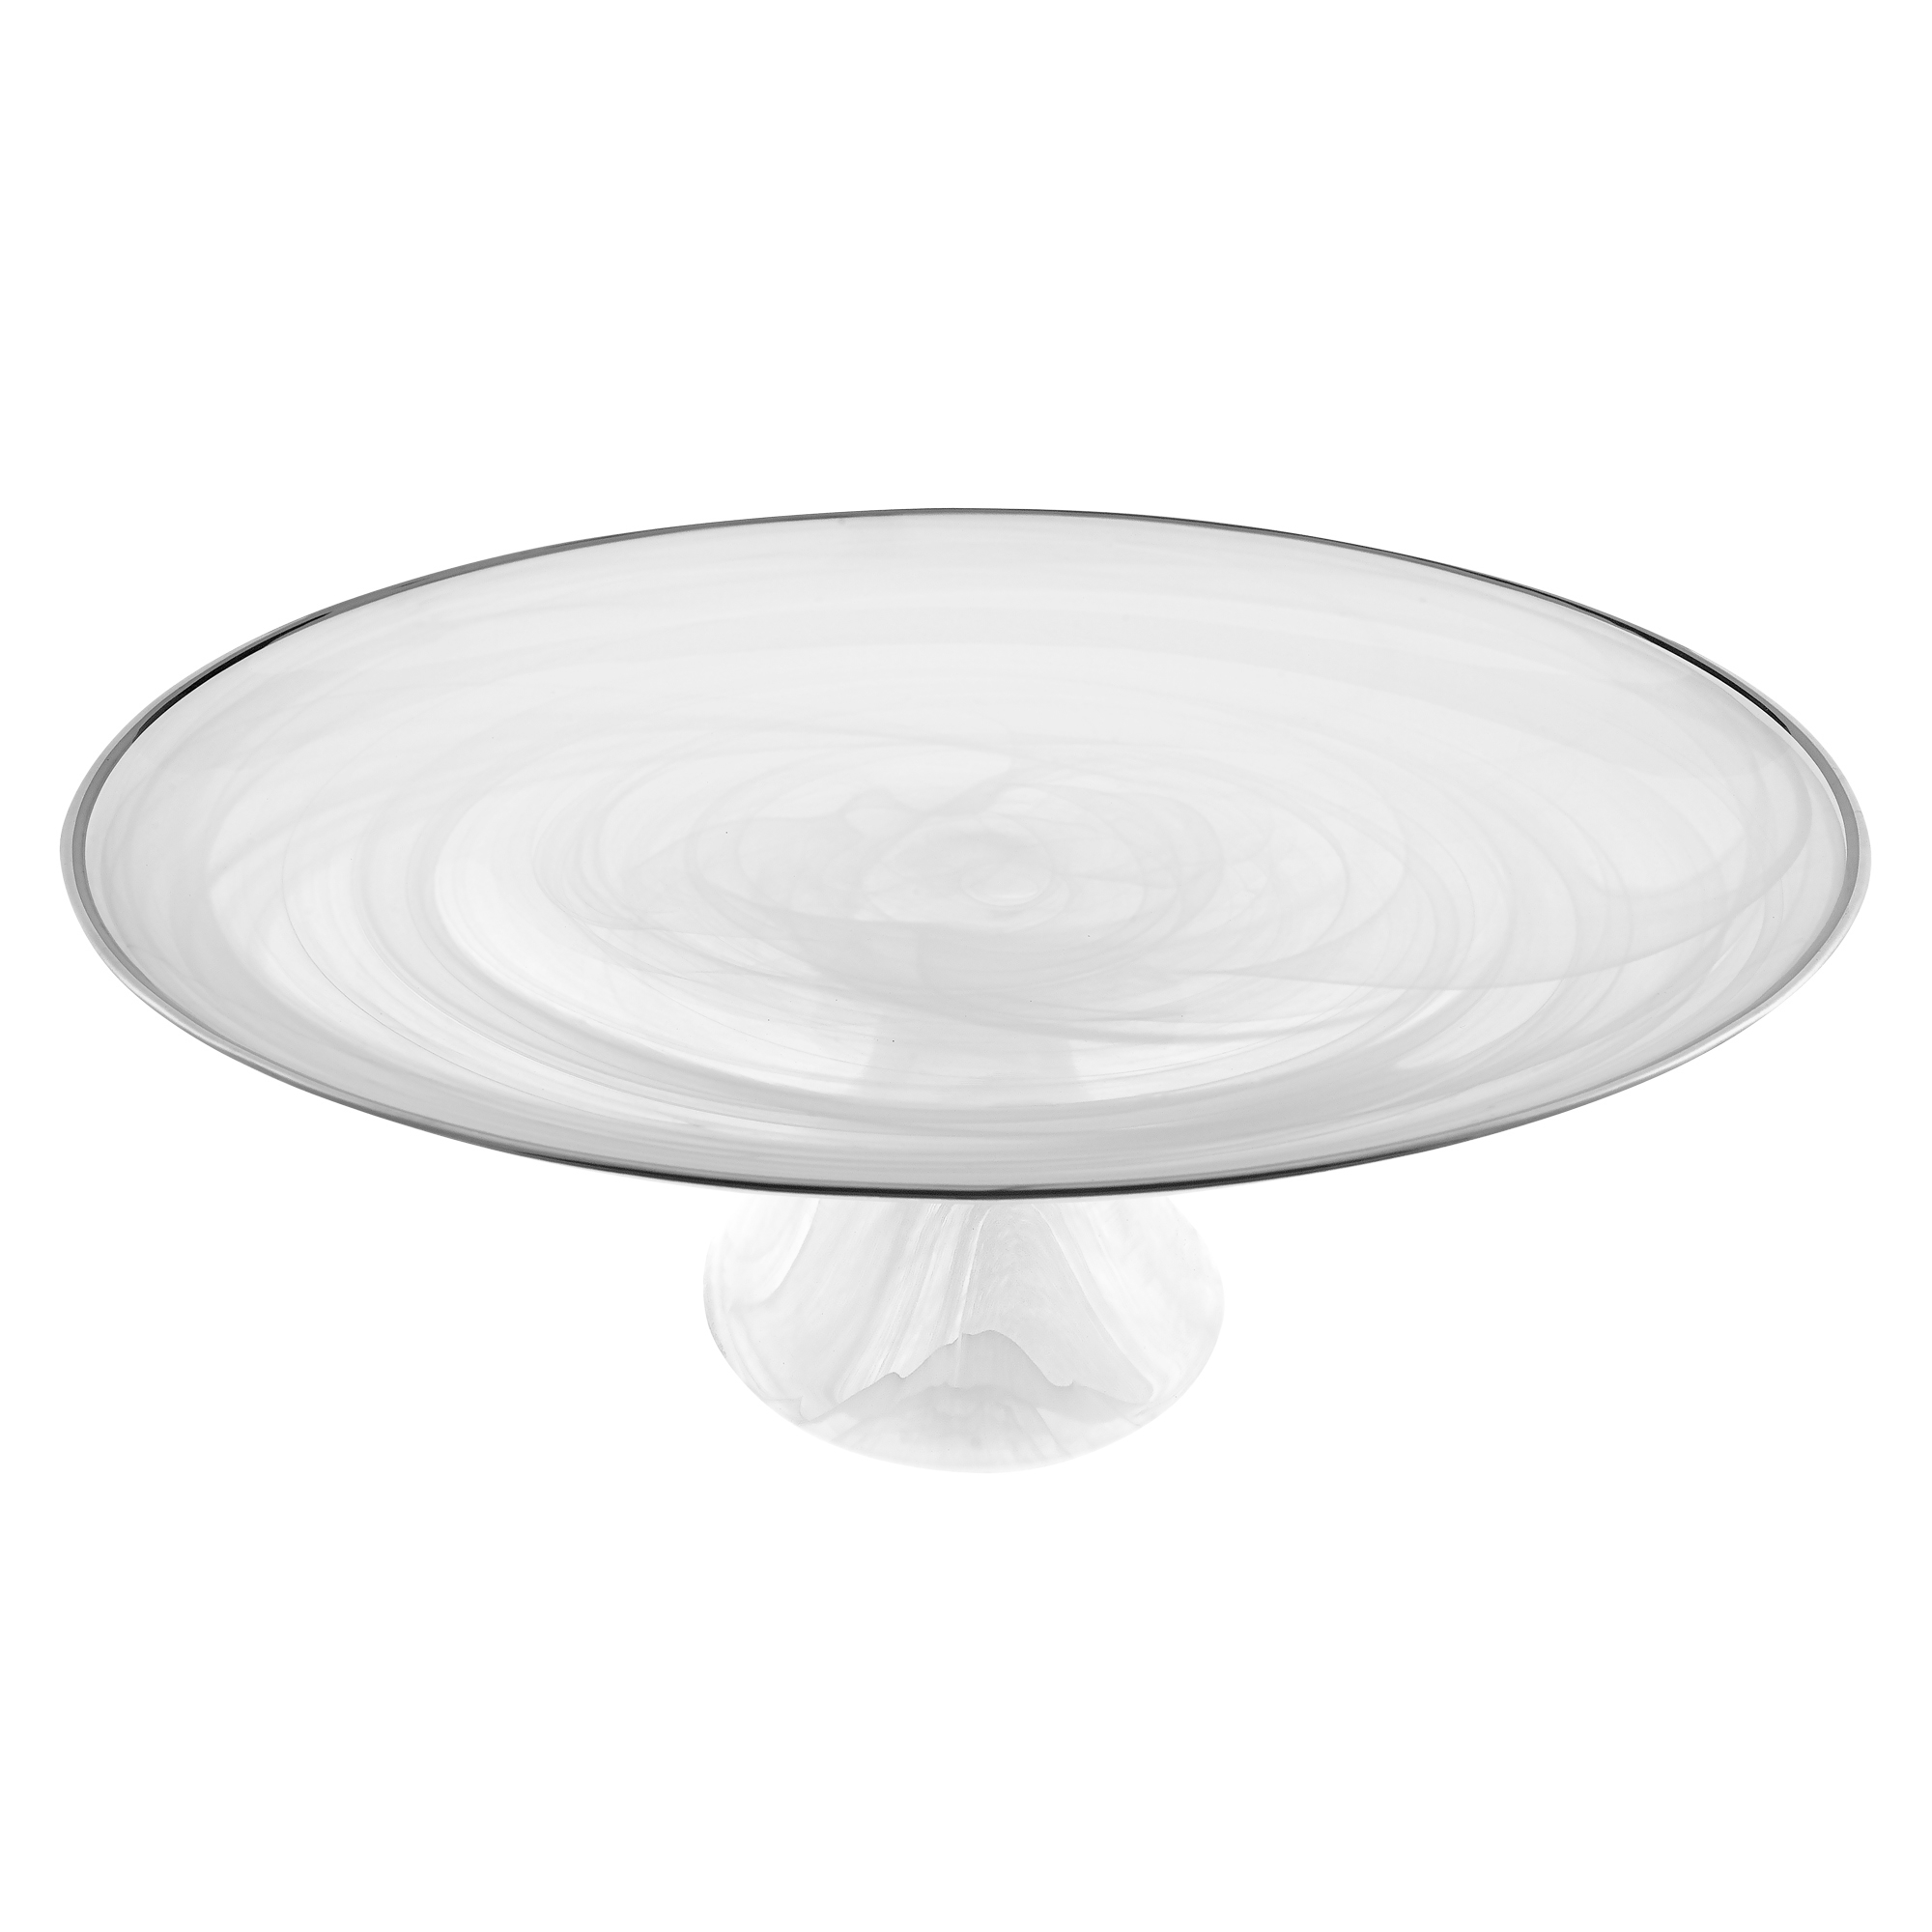 Handcrafted Optical Glass and White Silver Footed Cakestand With Silver Rim